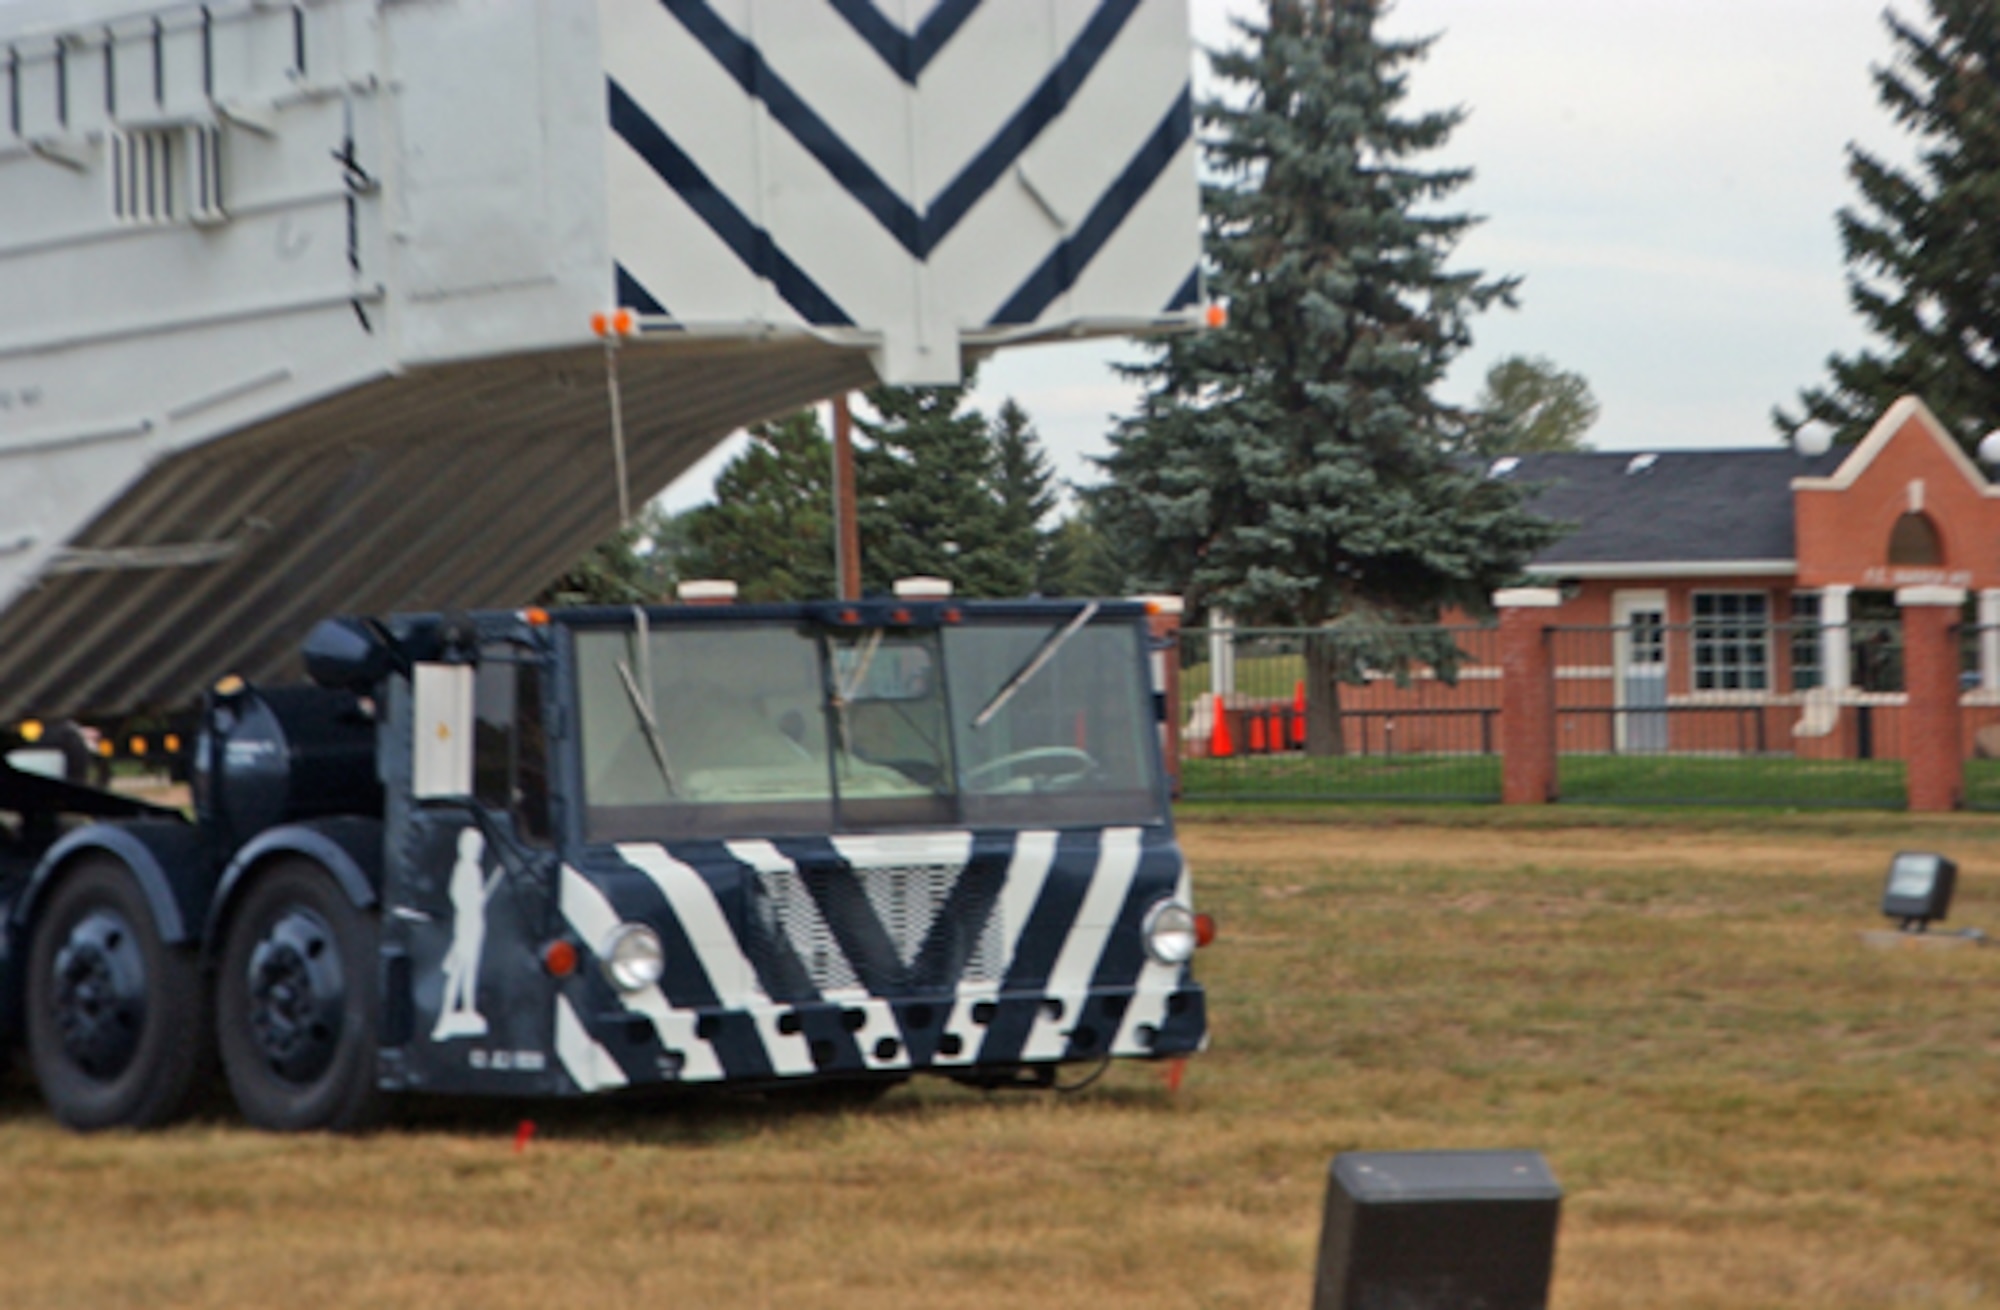 A transporter erector is added to the static display at Warren's front gate recently.